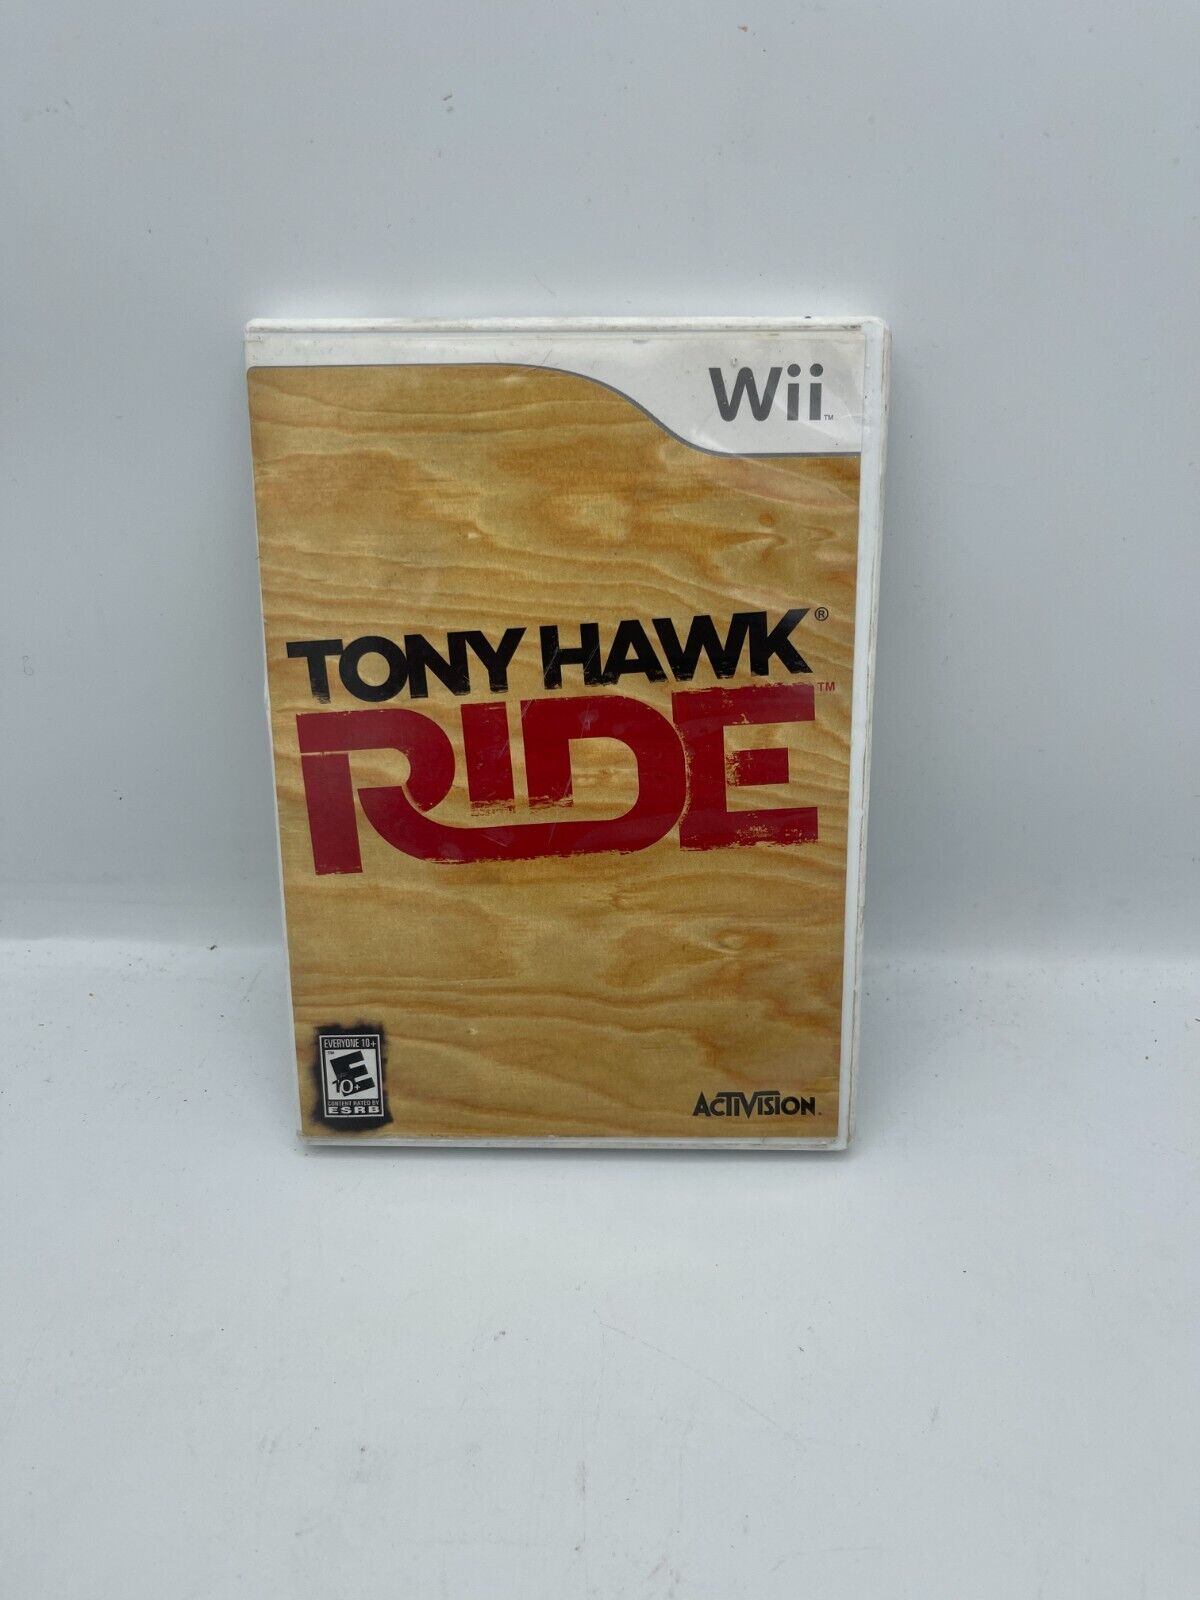 Tony Hawk Ride Video Game - COMPLETE with Case & Manual (Nintendo Wii)